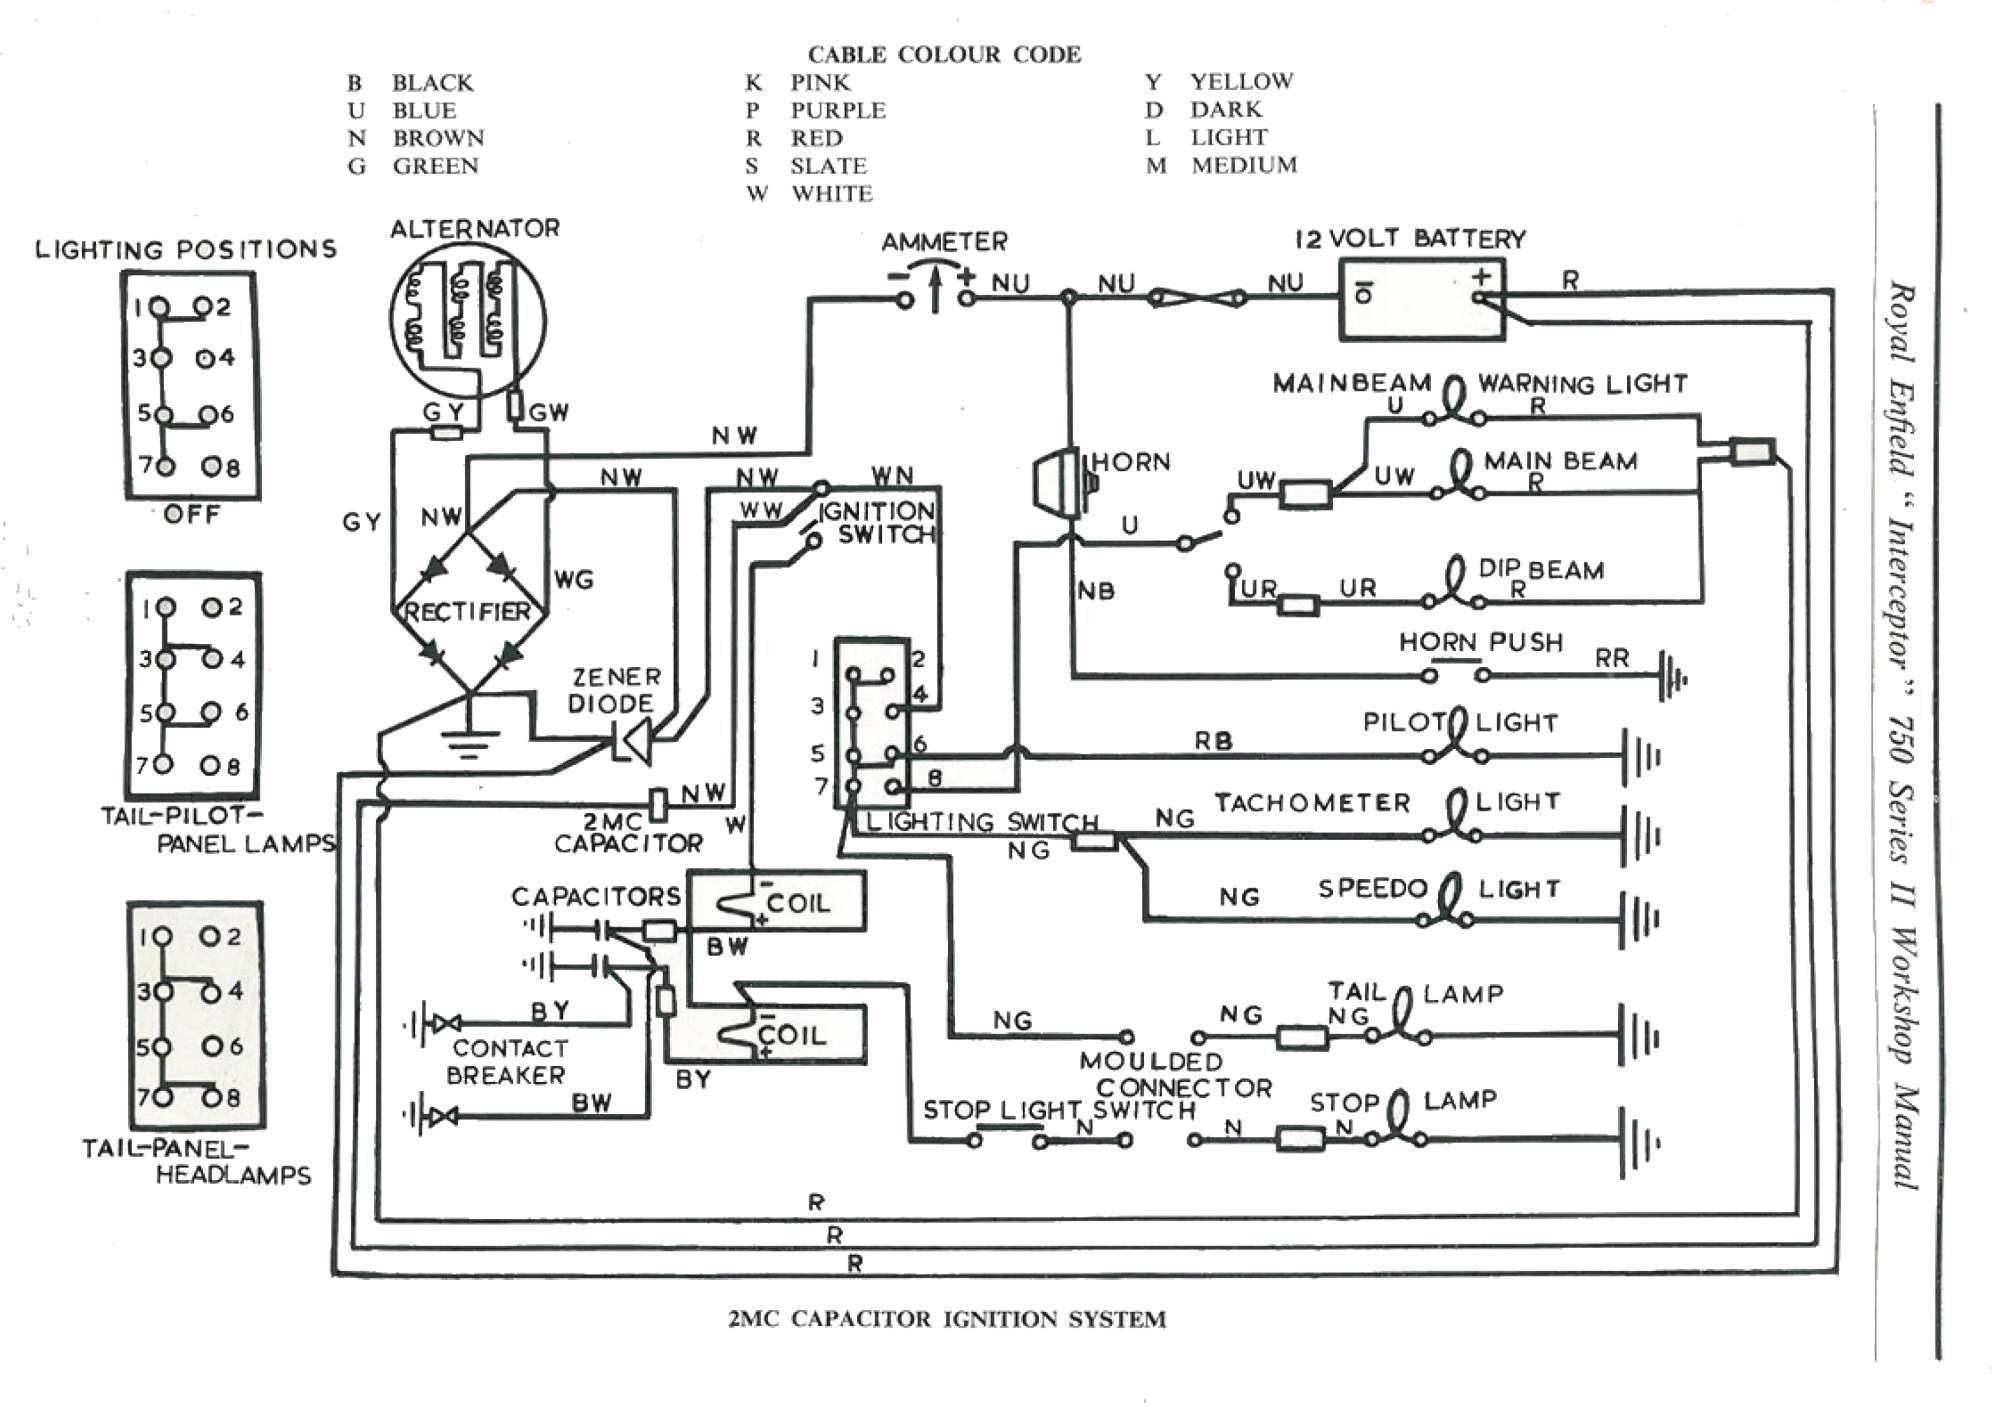 Royal Enfield Engine Diagram Dan S Motorcycle "various Wiring Systems and Diagrams" Of Royal Enfield Engine Diagram